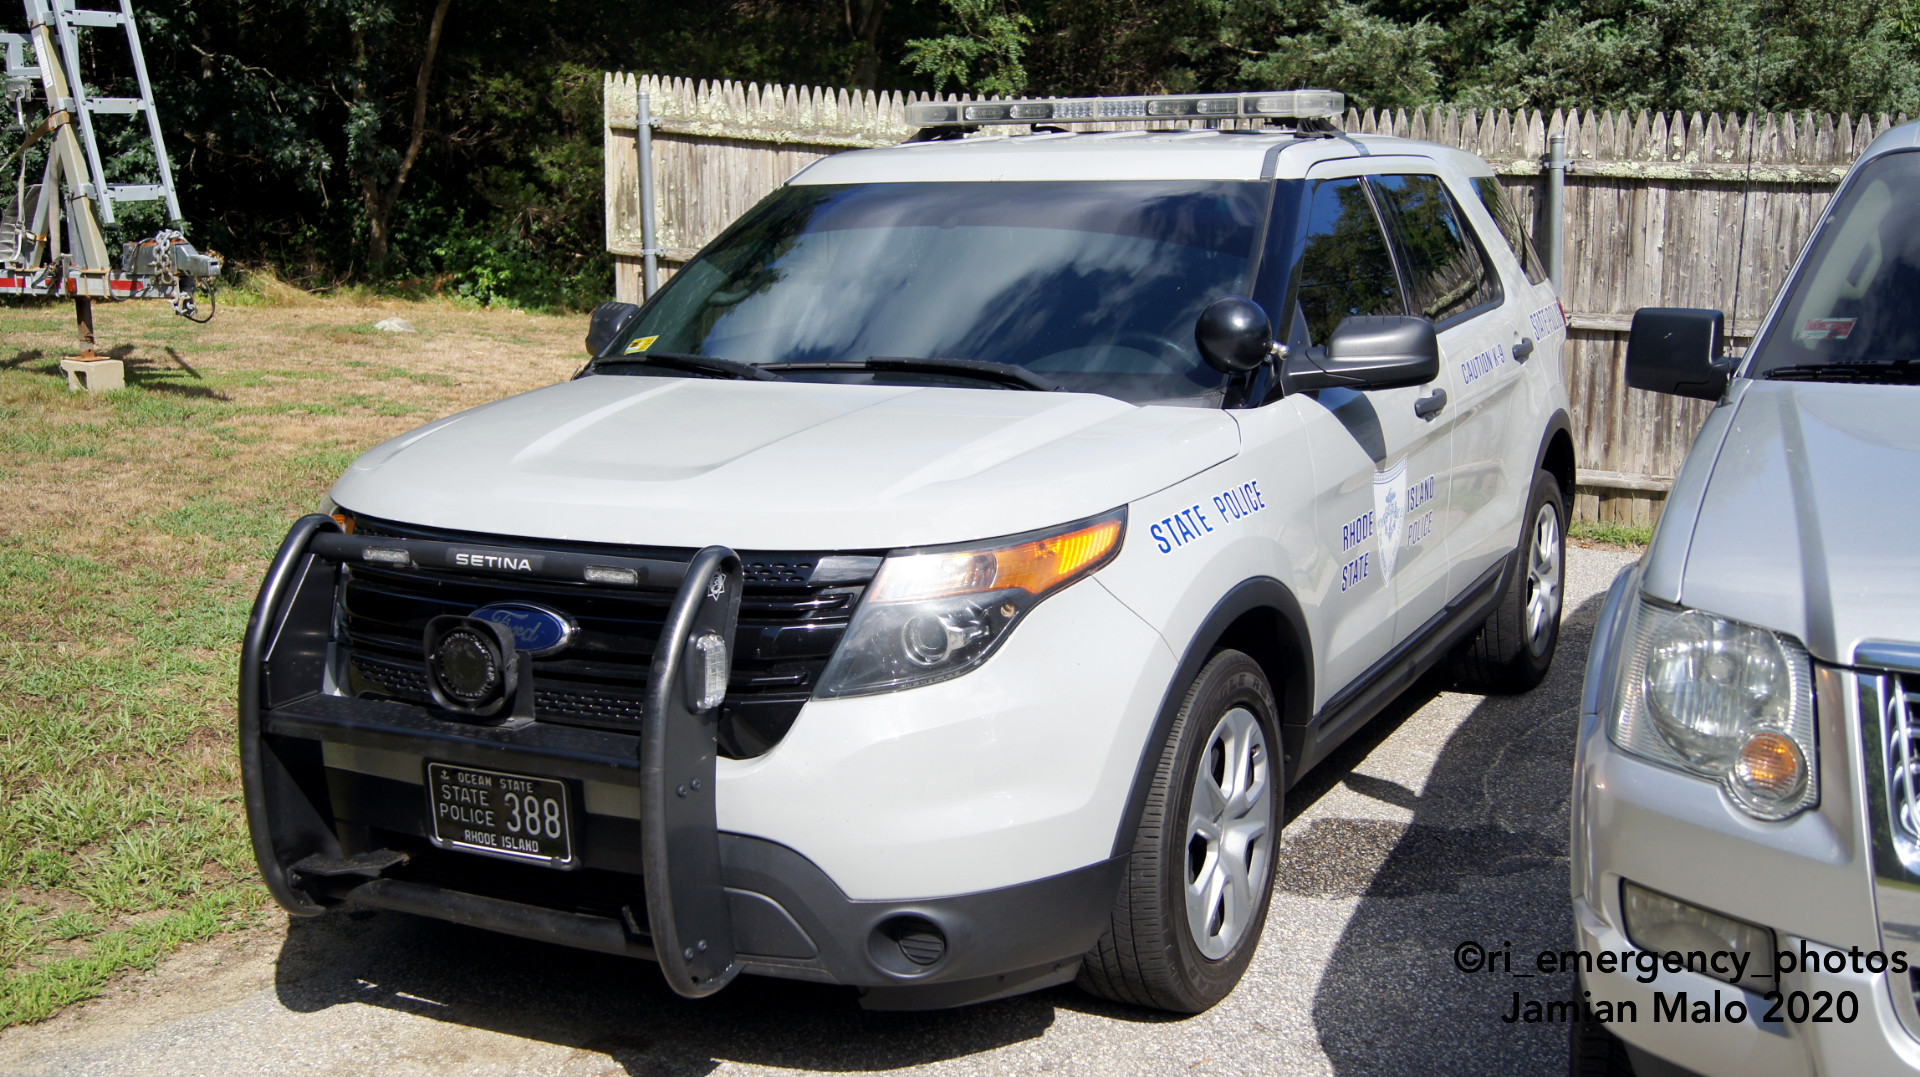 A photo  of Rhode Island State Police
            Cruiser 388, a 2013 Ford Police Interceptor Utility             taken by Jamian Malo